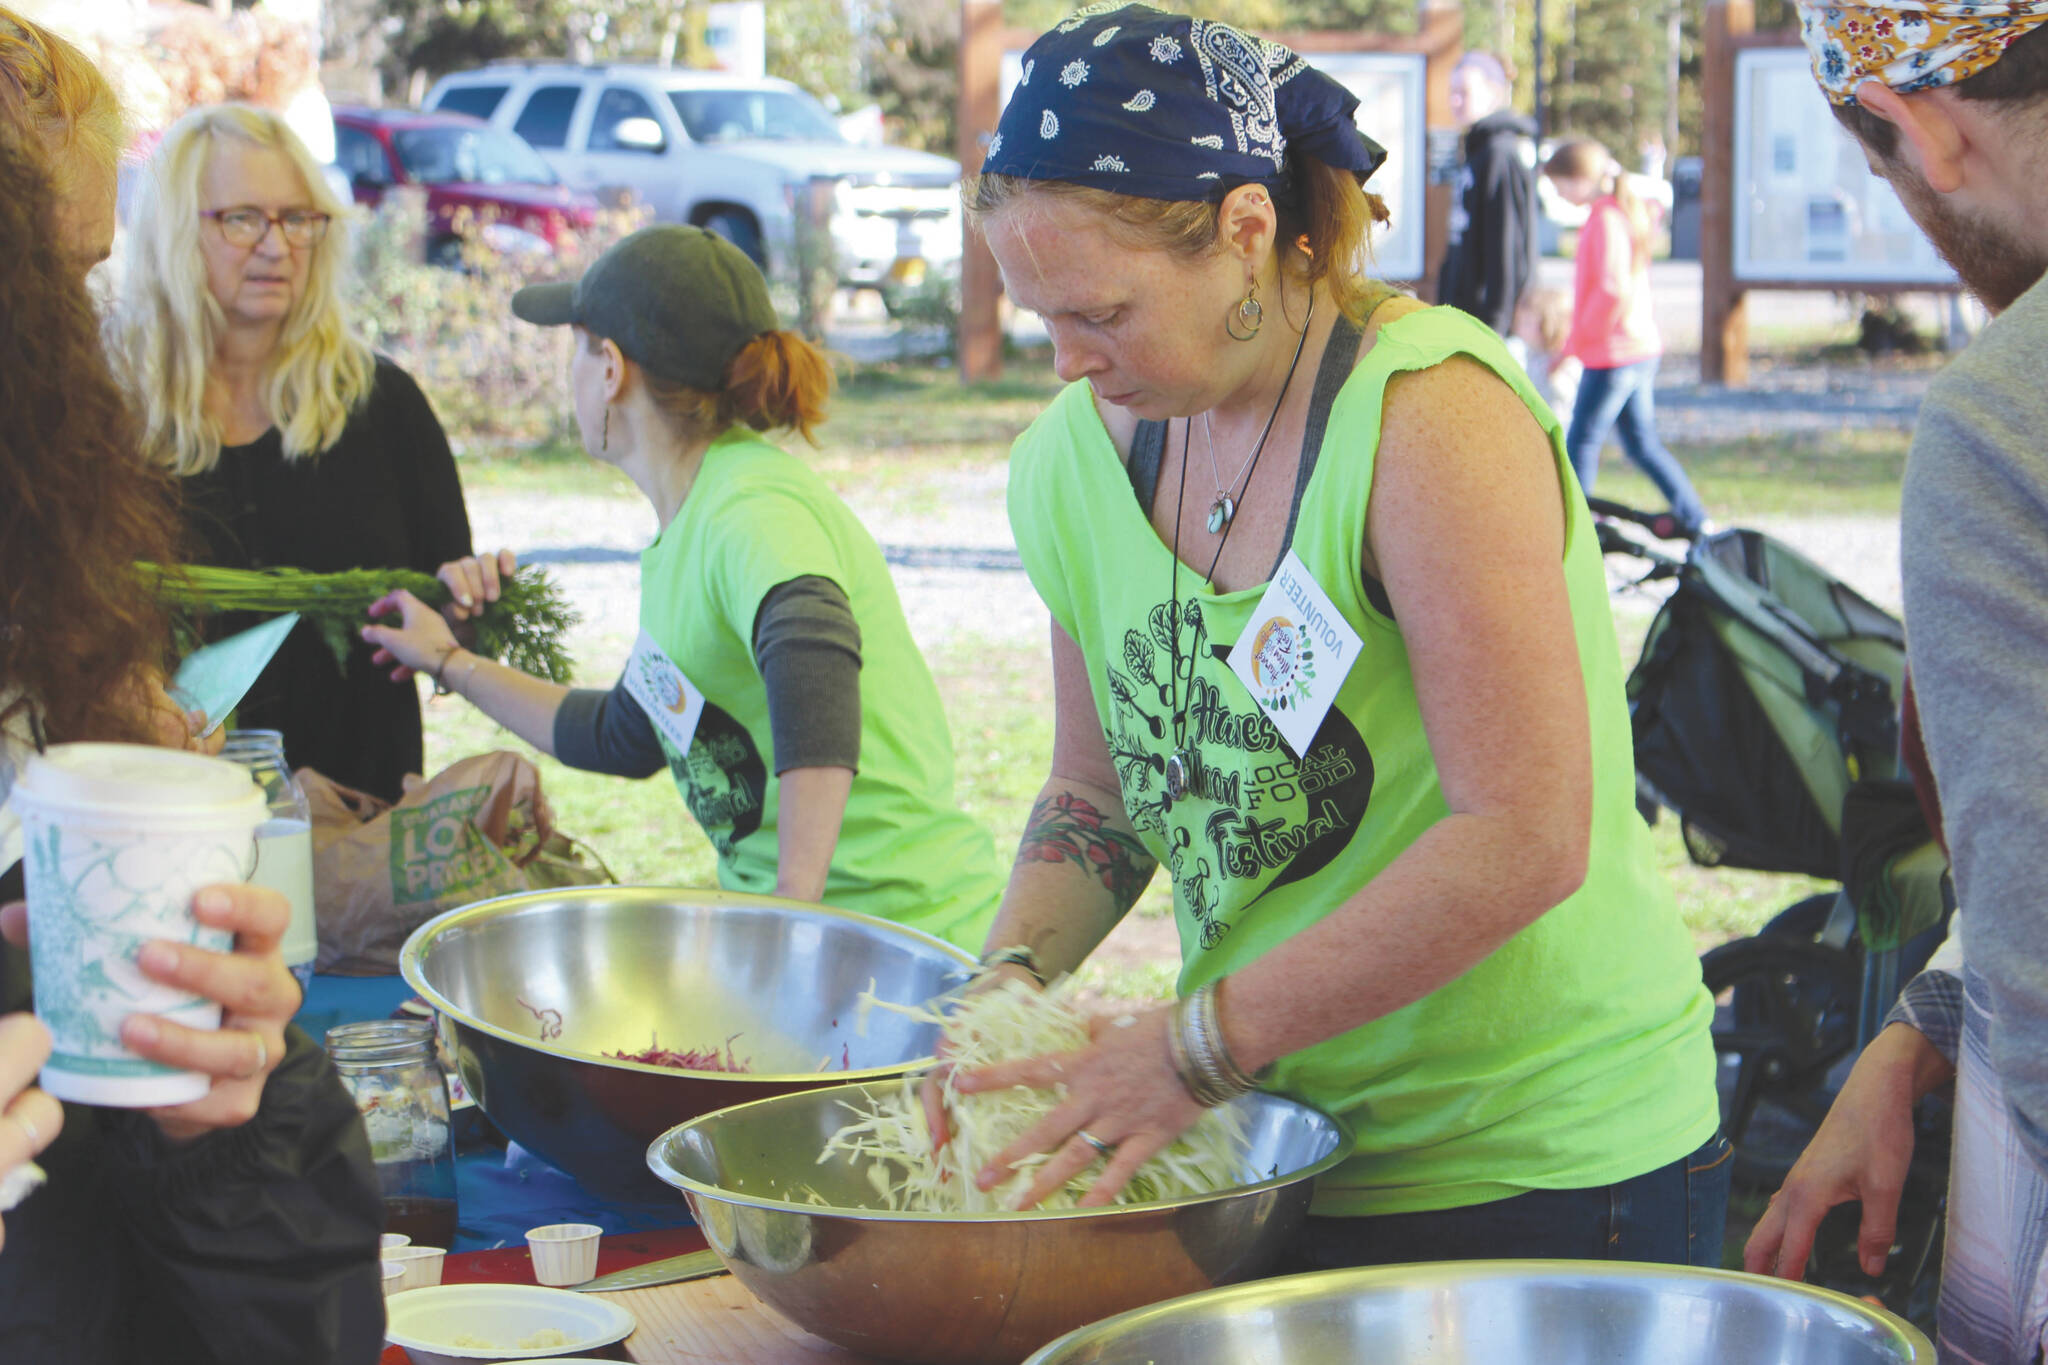 Volunteers work the fermentation station at the Harvest Moon Local Food Festival at Soldotna Creek Park on Sept. 14, 2019. (Photo by Brian Mazurek/Peninsula Clarion file)